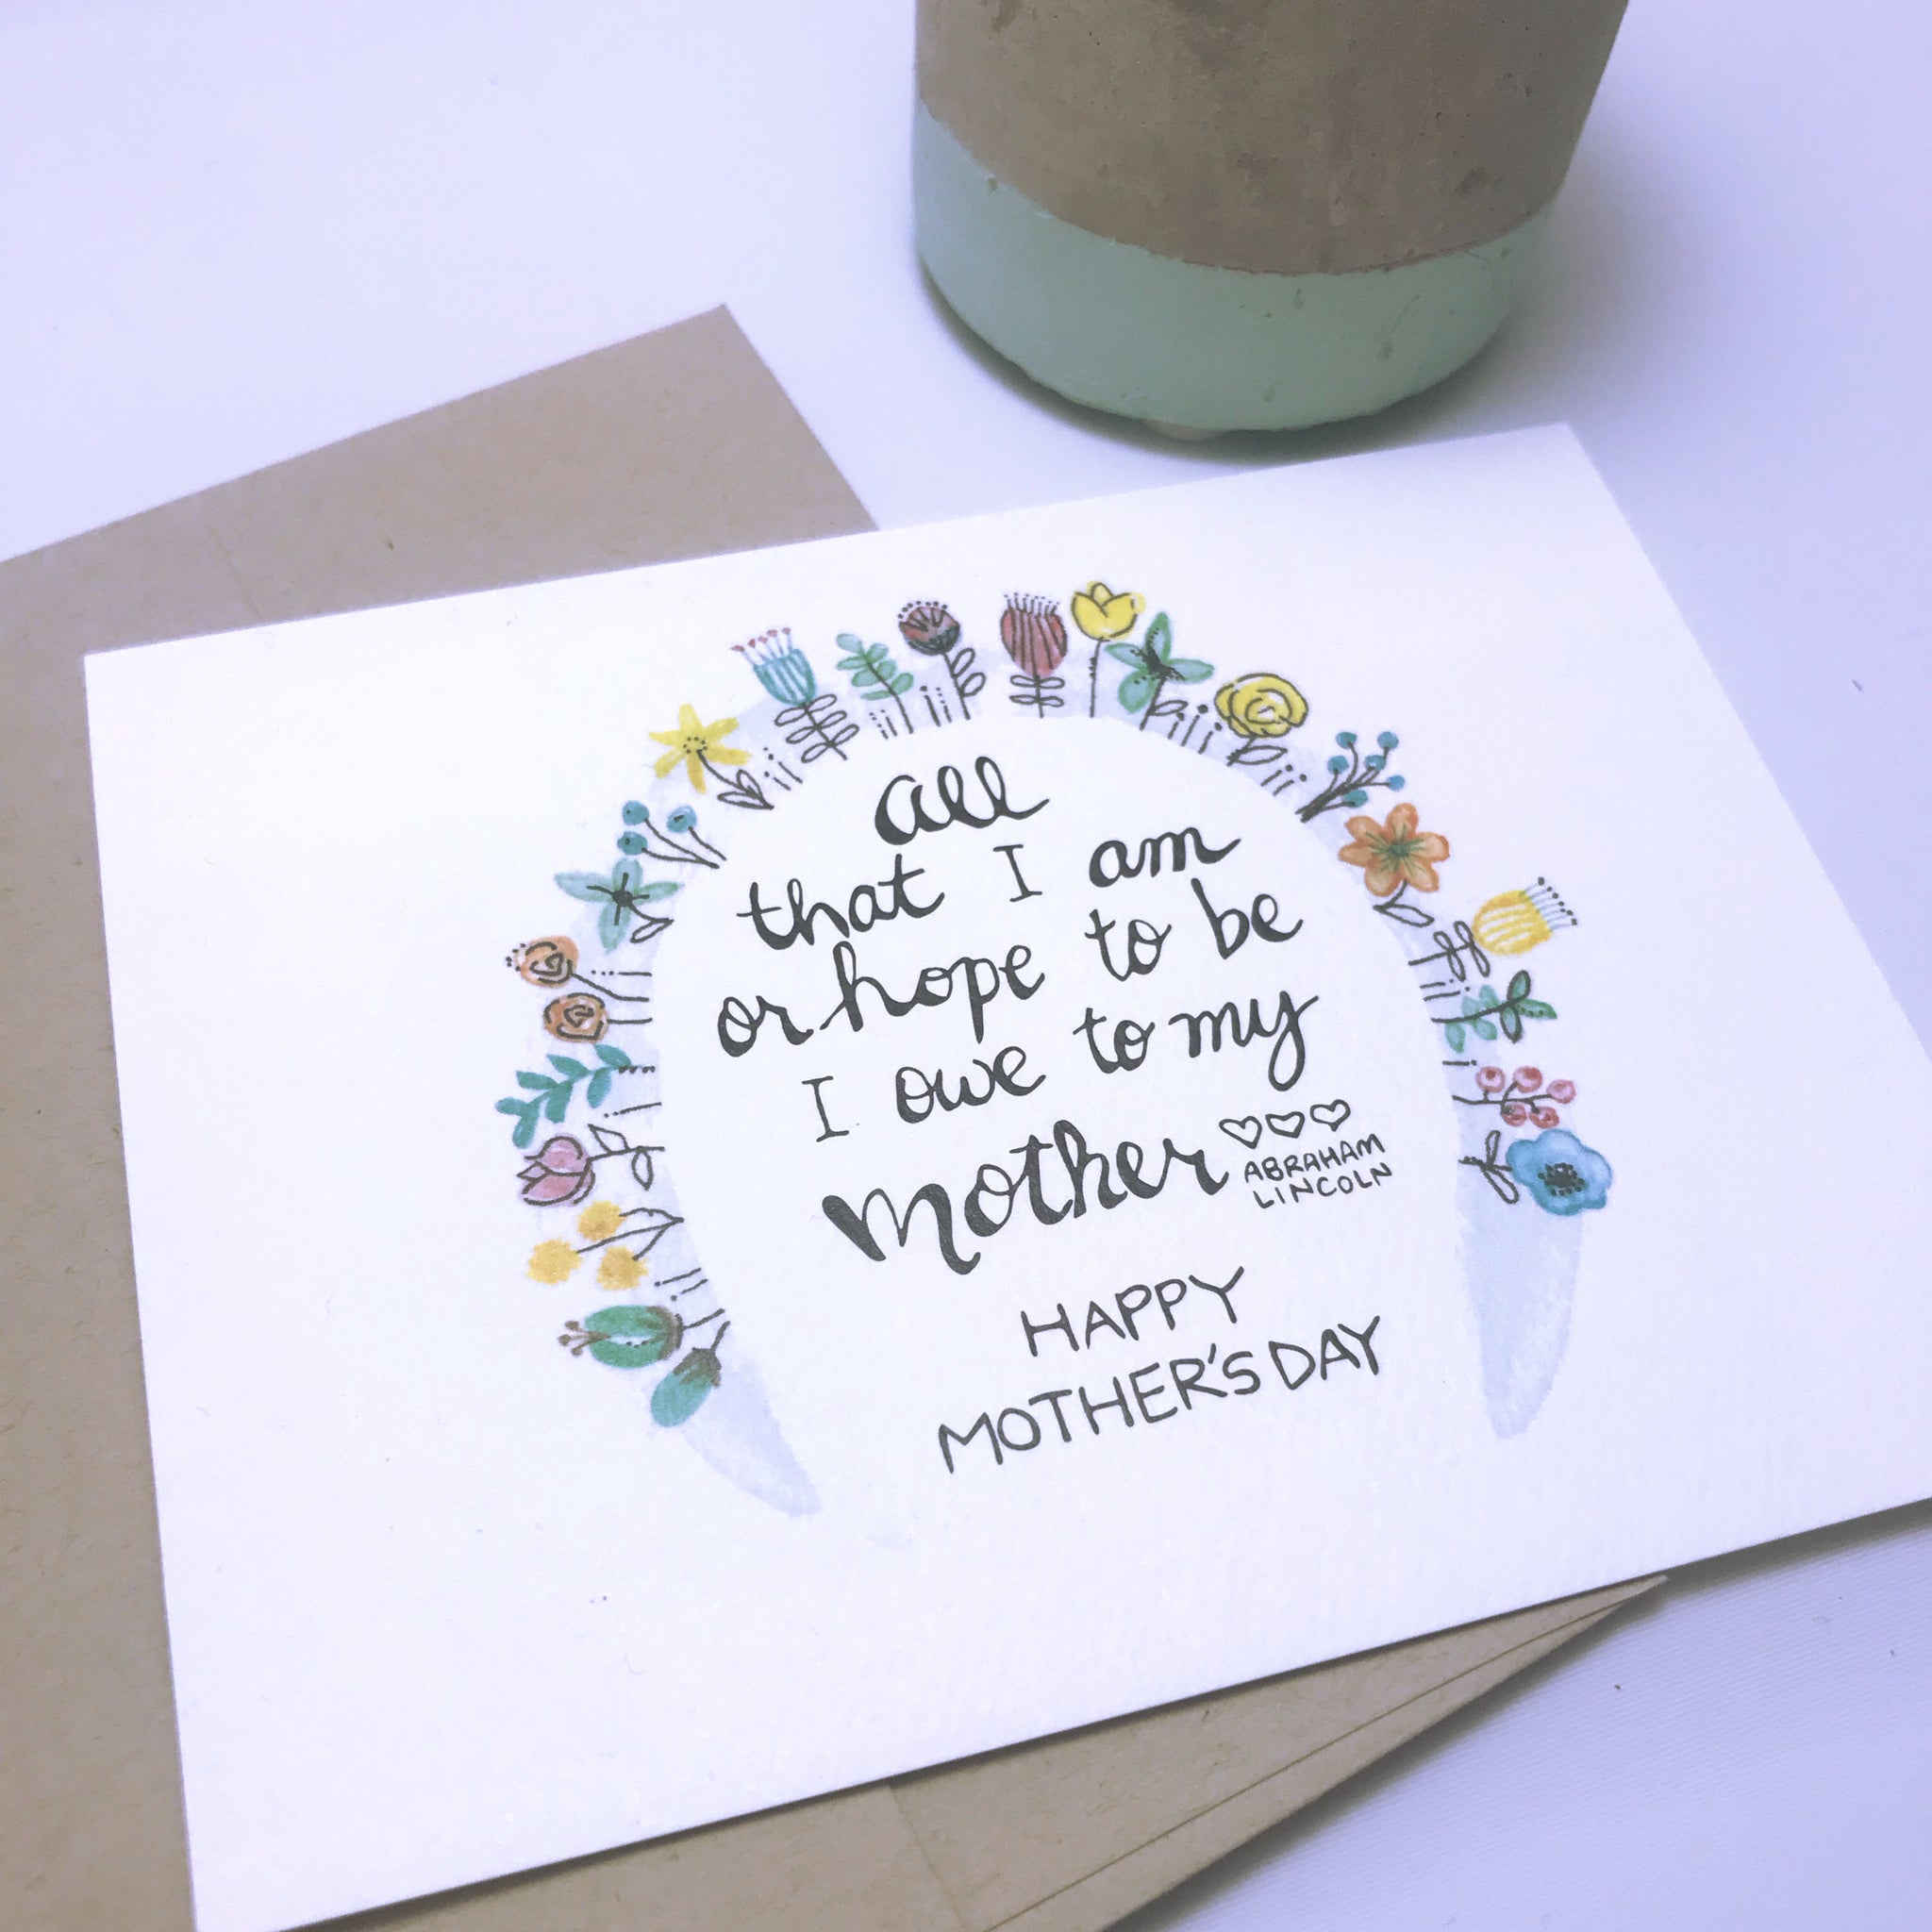 Mother's Day Card / Abraham Lincoln quote / watercolor and ink / single folded card / blank inside / Kraft envelope